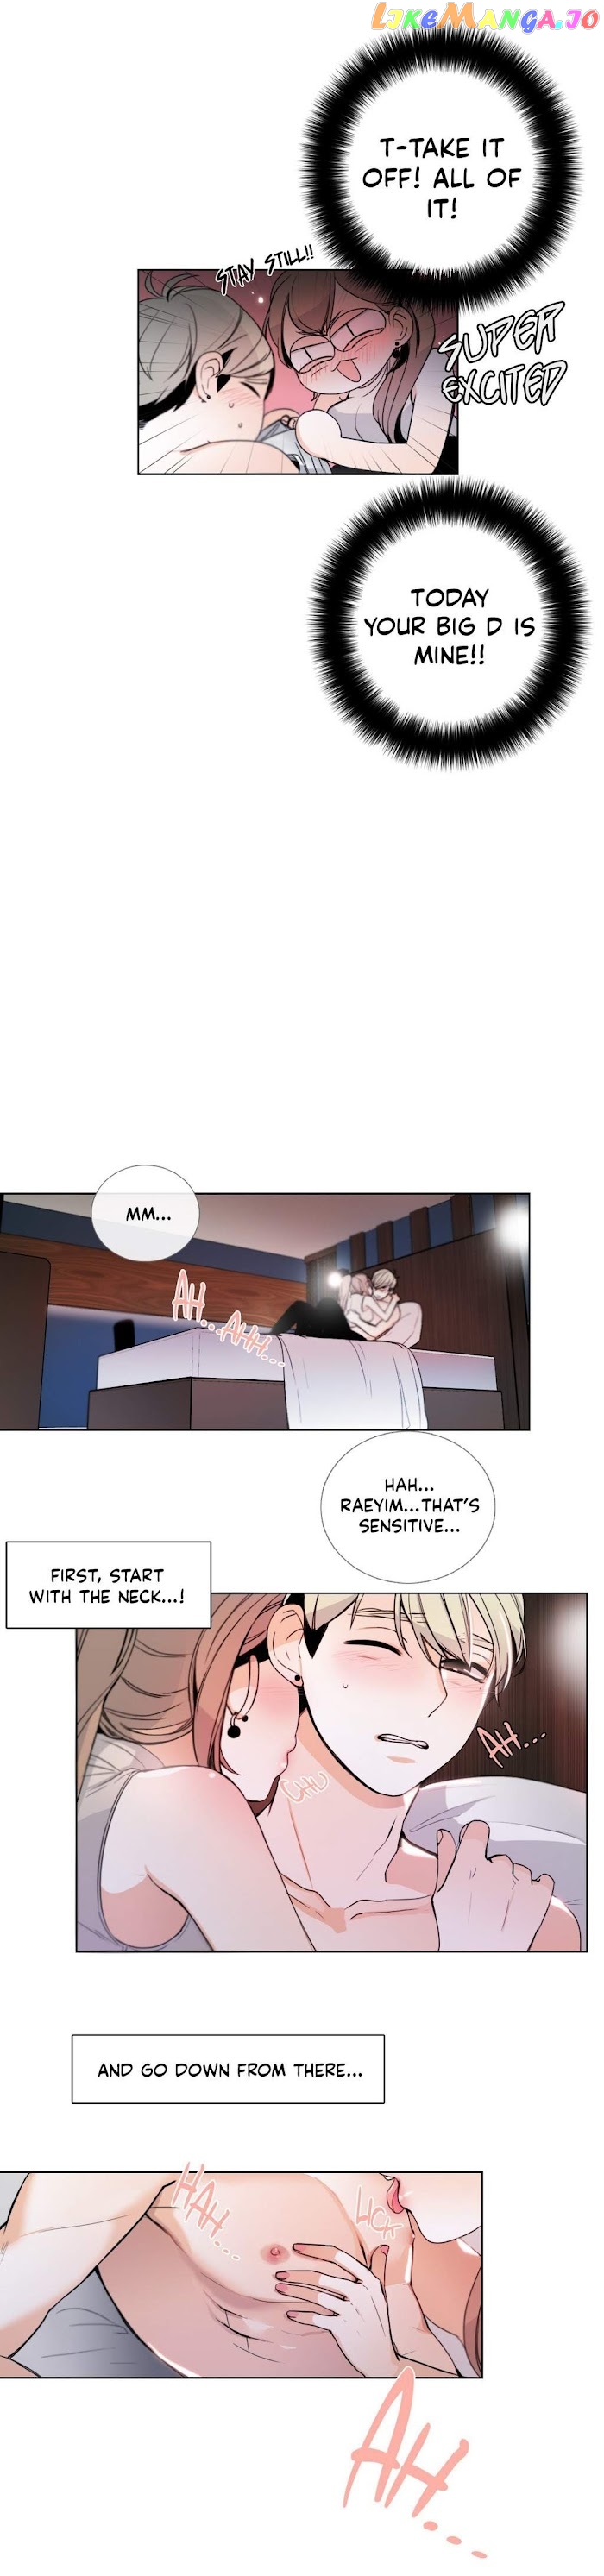 Talk to Me chapter 21-23 - page 23